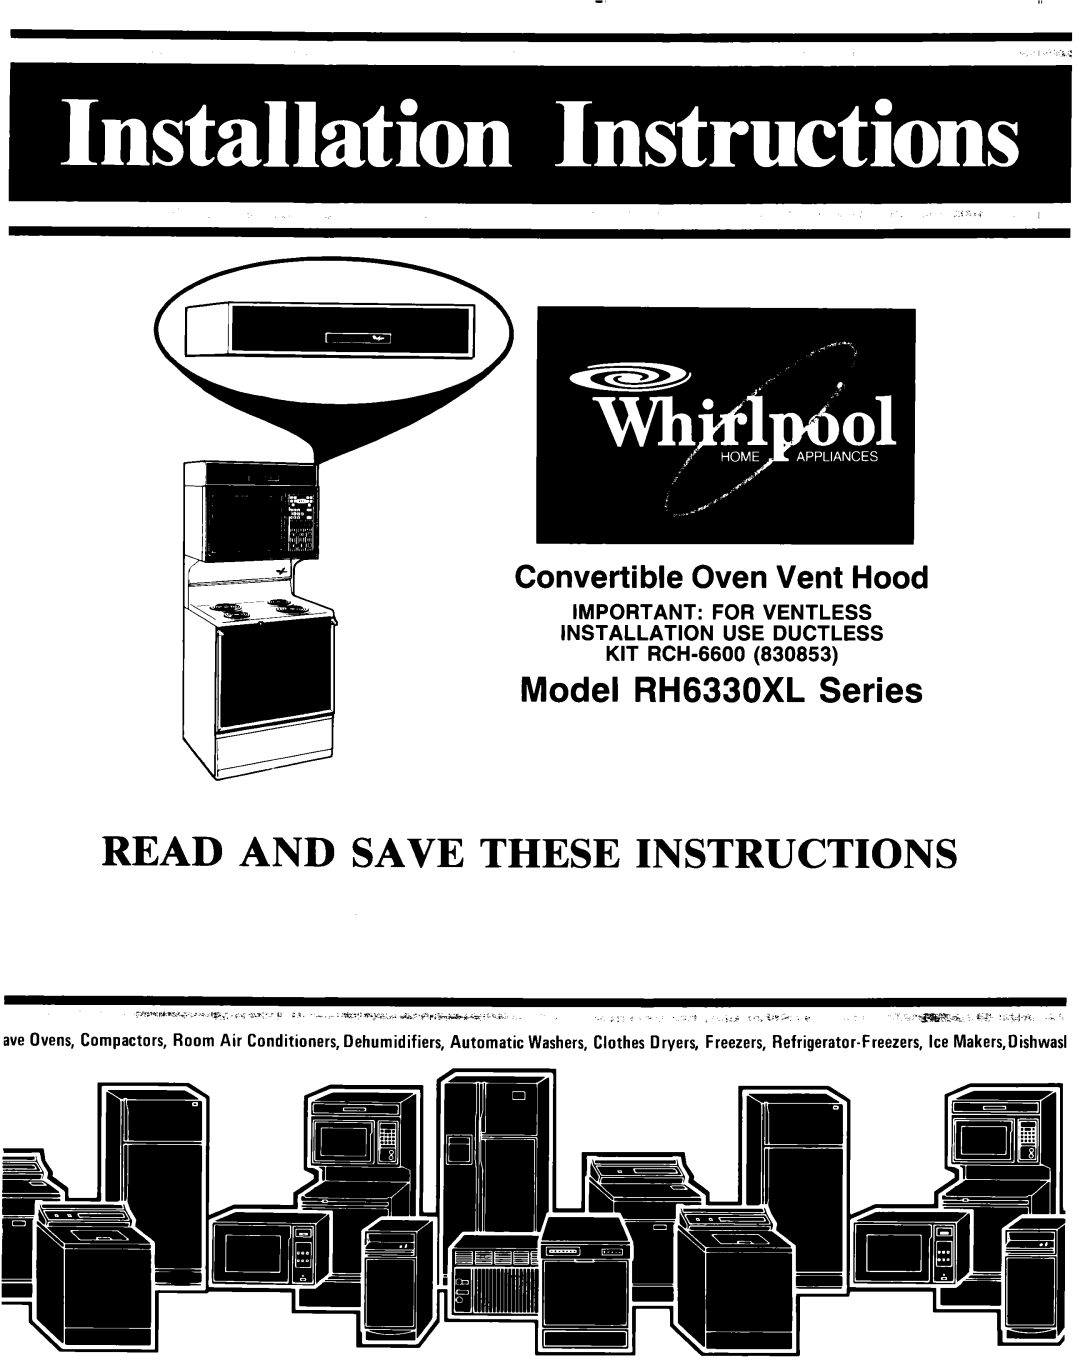 Whirlpool RH6330XL manual Read and Save These Instructions 